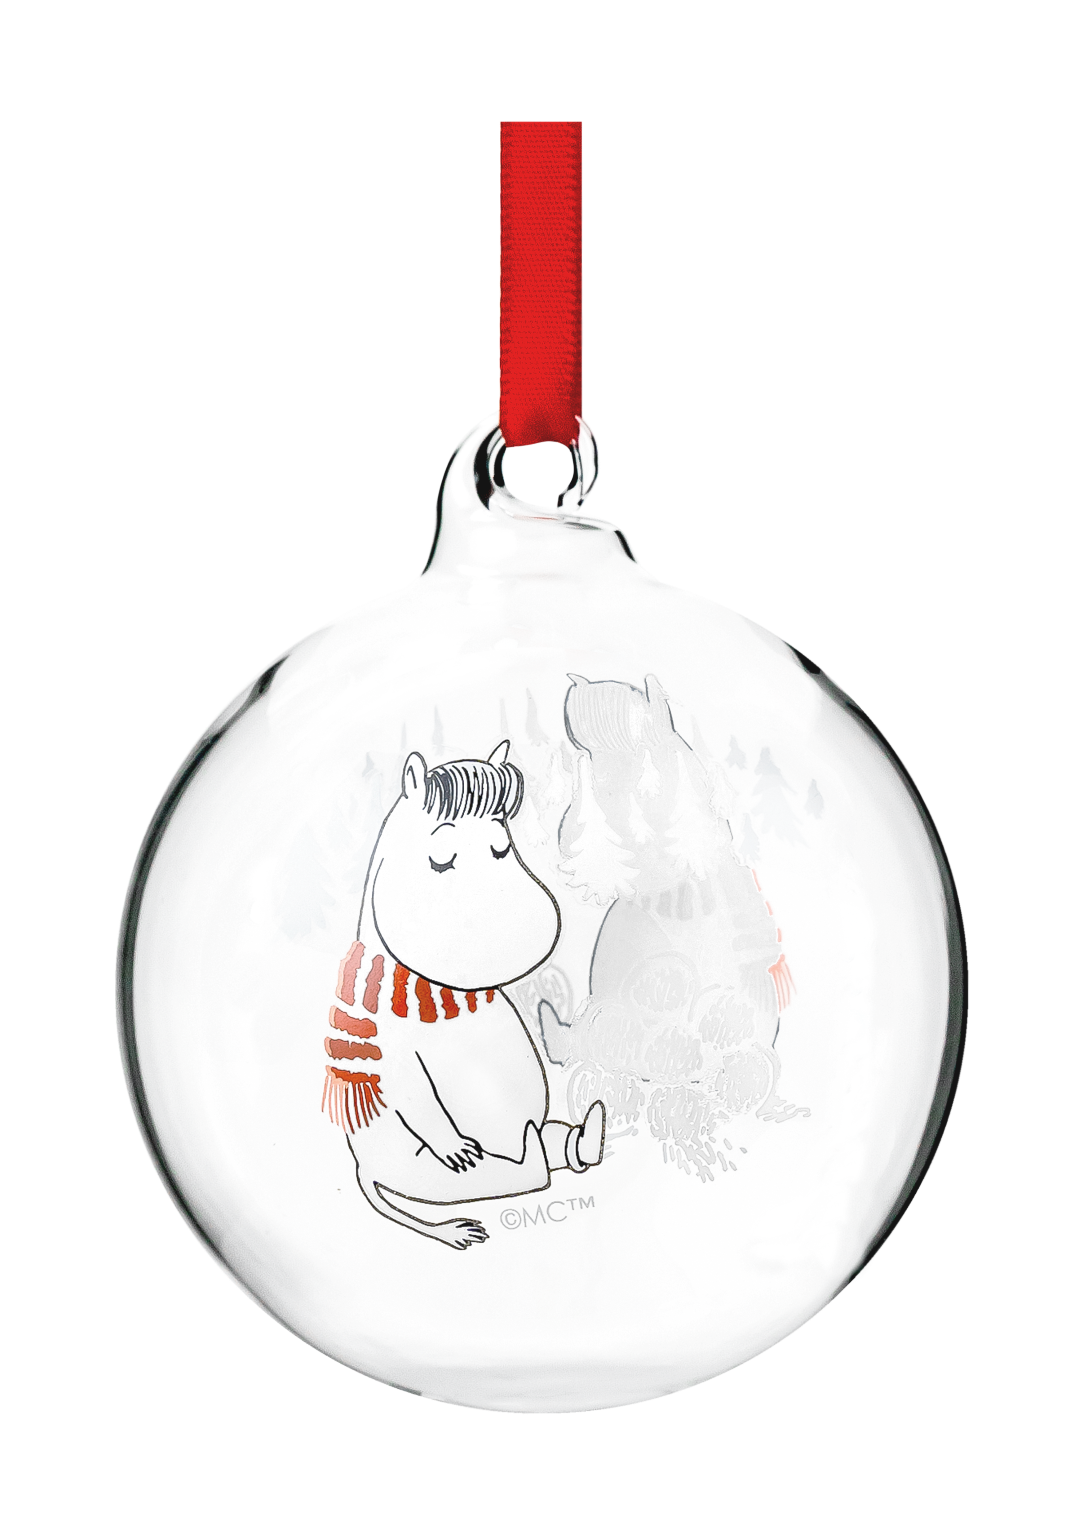 Moomin Christmas Bauble - Snorkmaiden with Snowballs